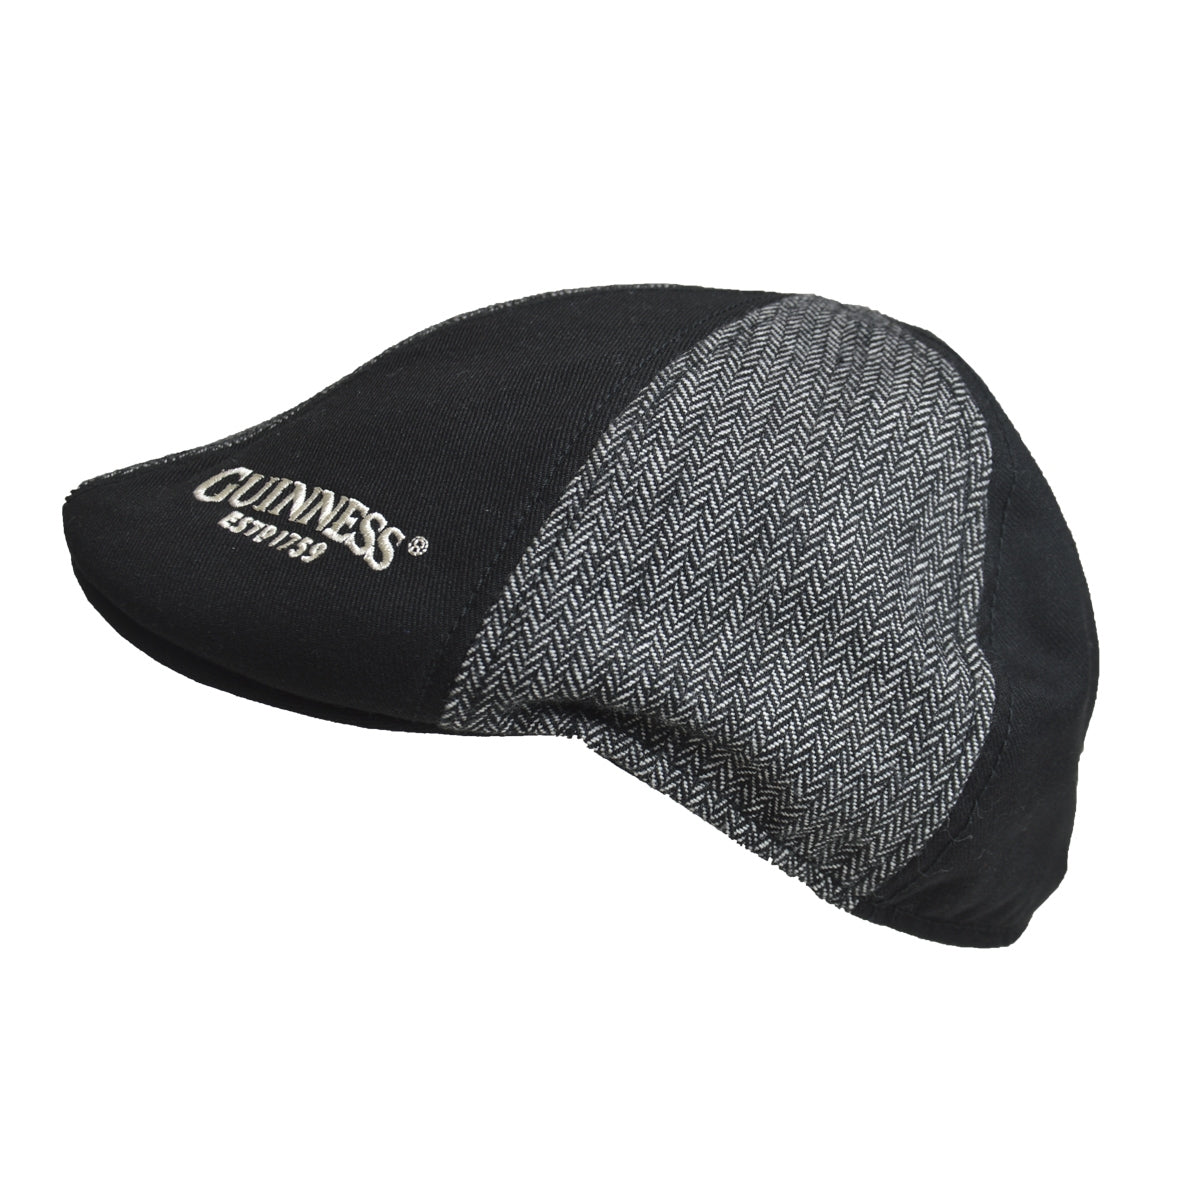 Embroidered Guinness Paneled Ivy Cap in black and grey.